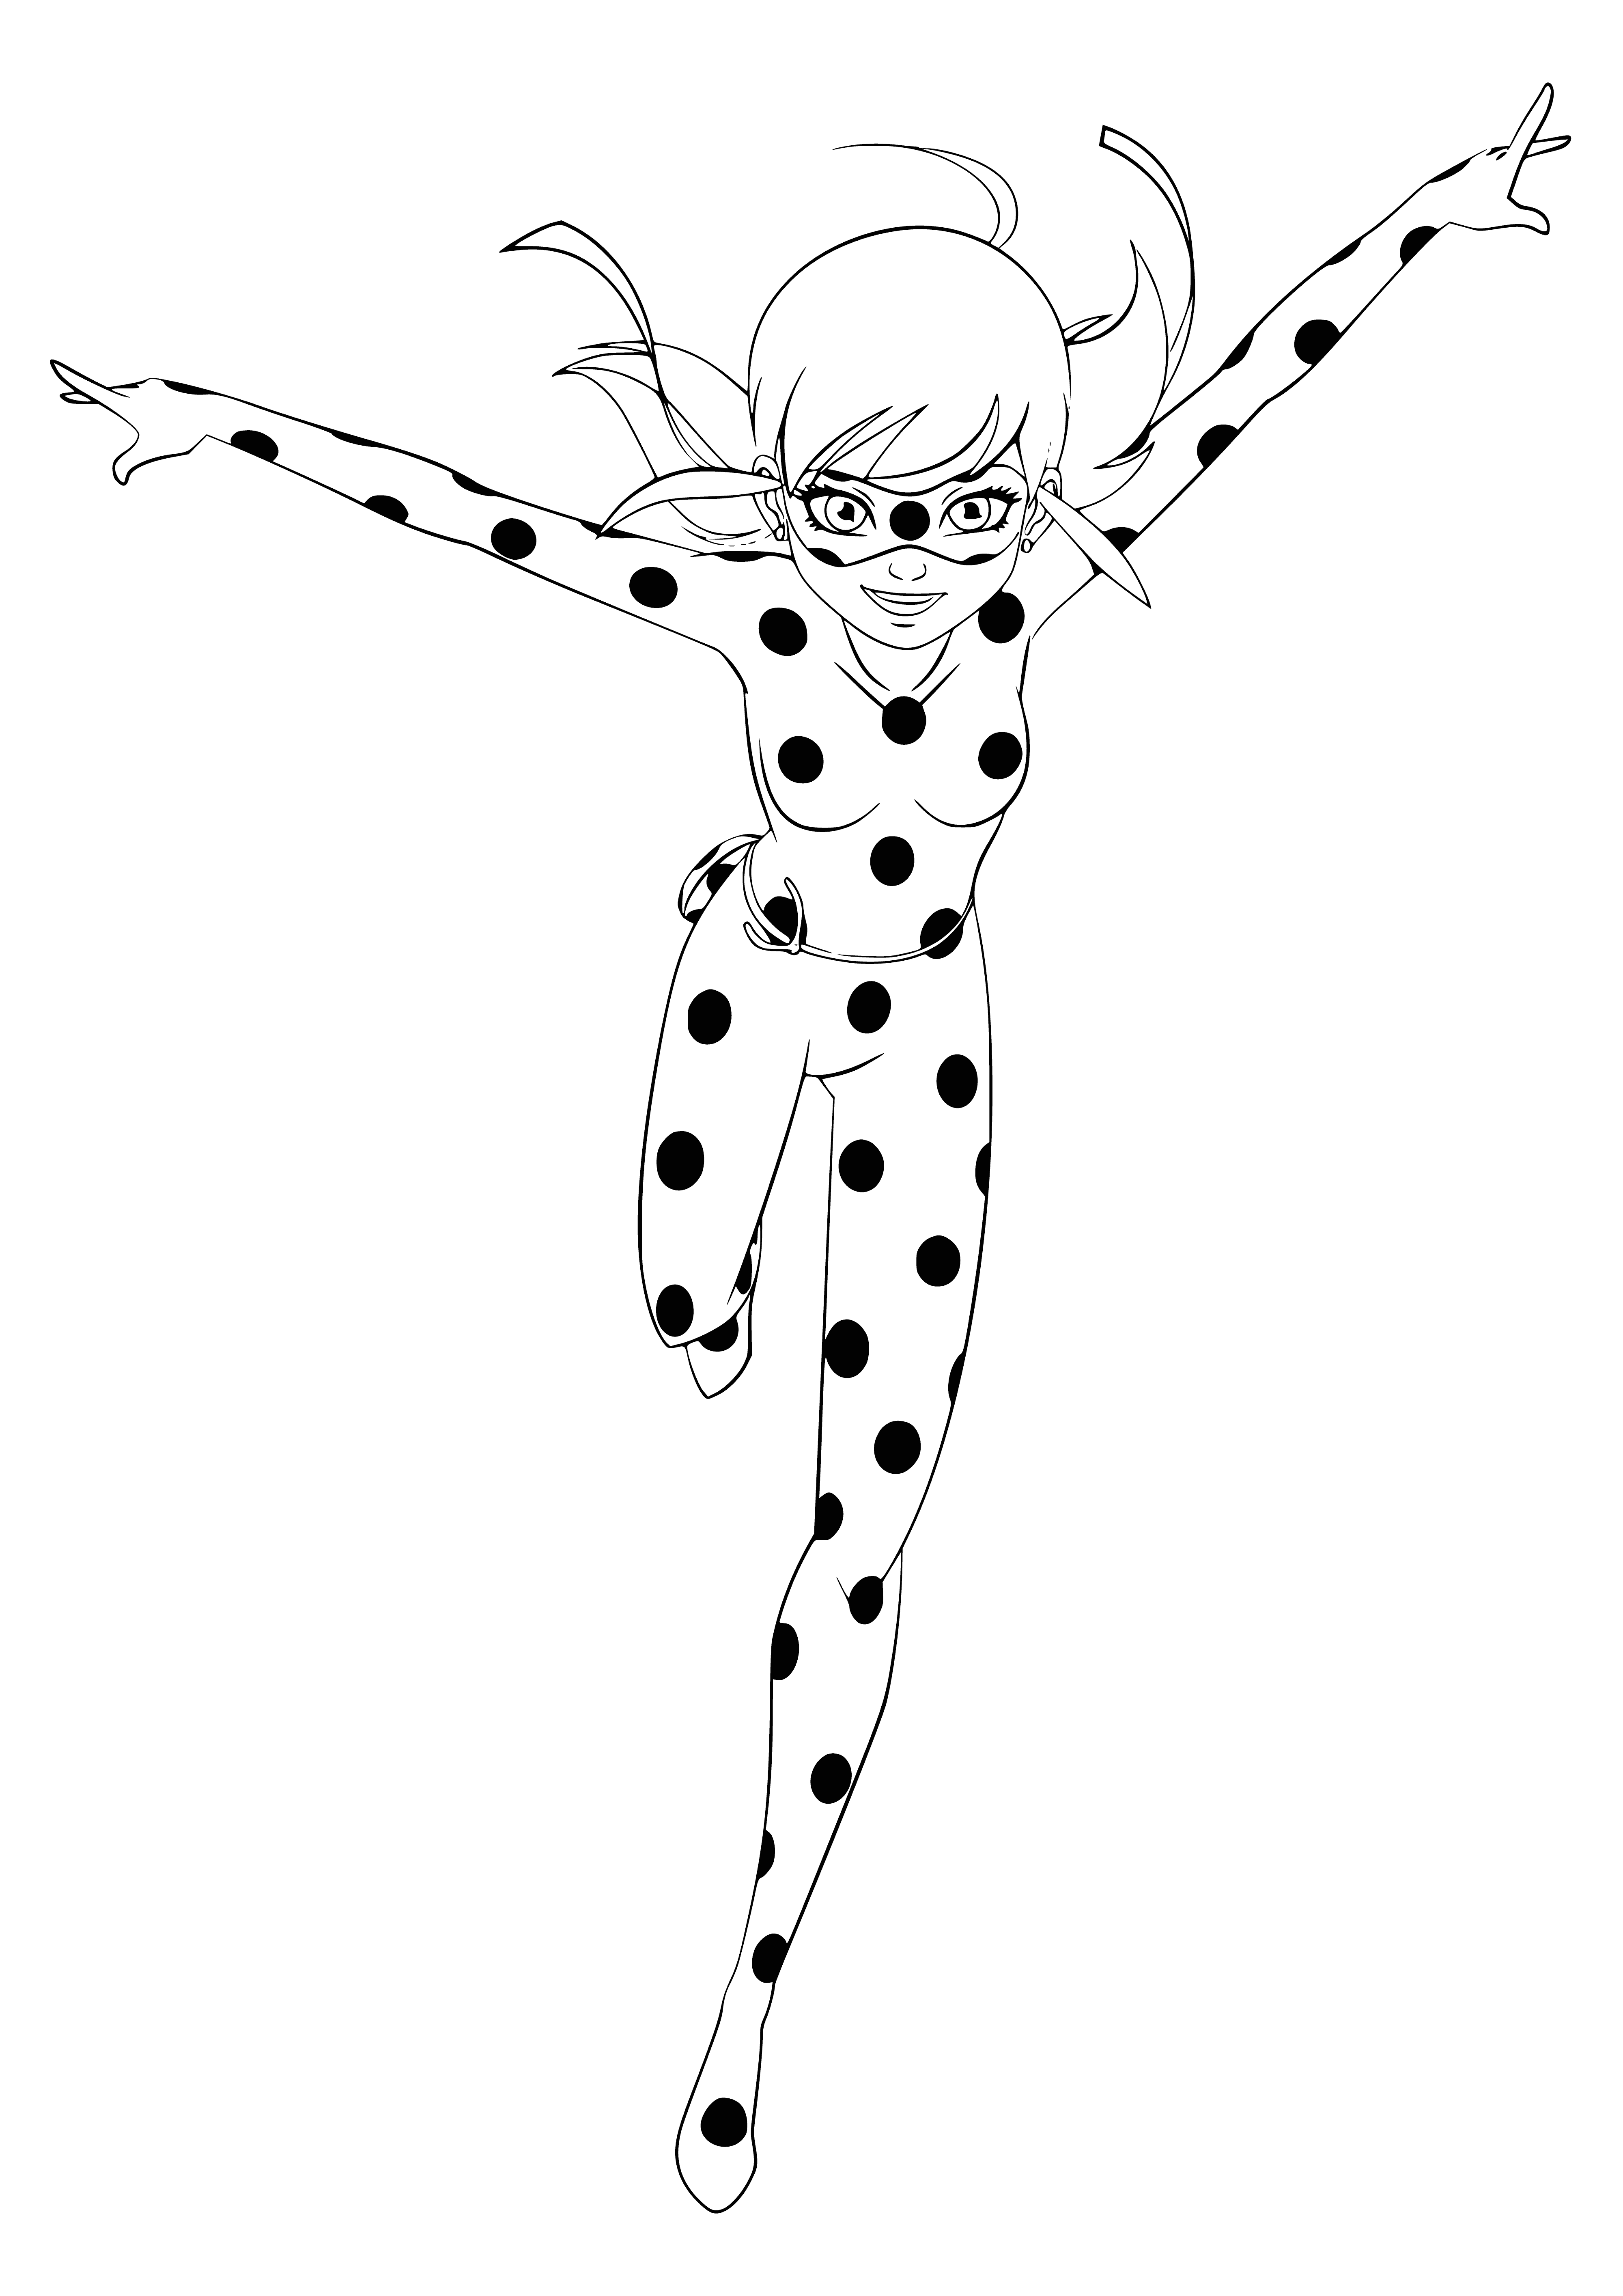 Lady Bug coloring page